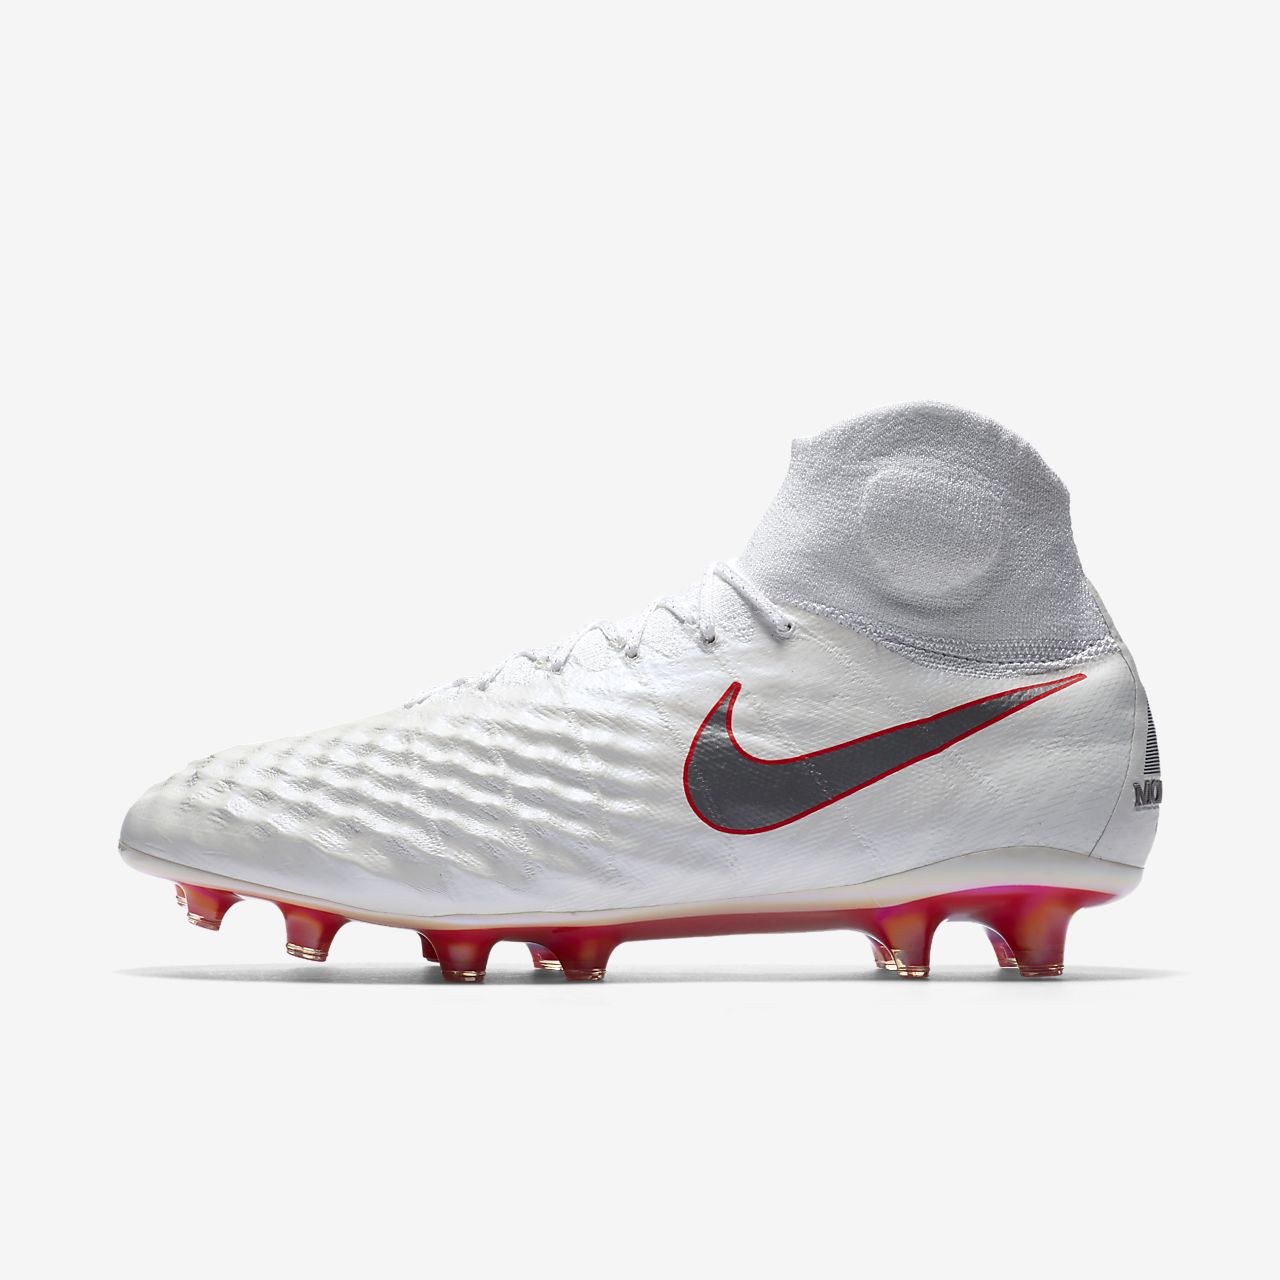 magista nike soccer cleats